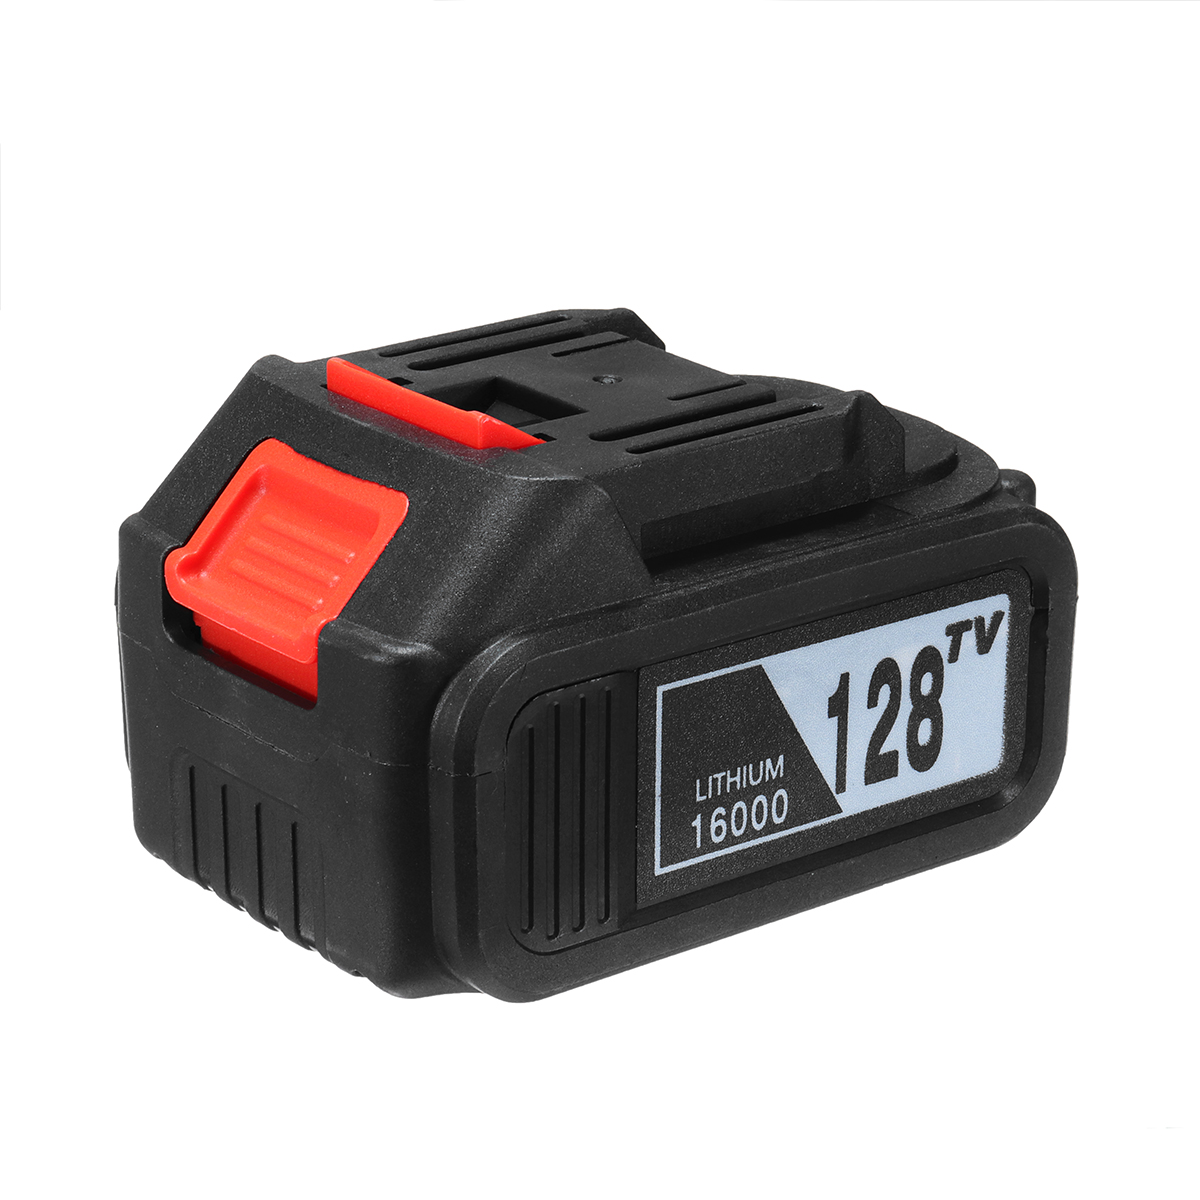 320NM-Brushless-Electric-Impact-Wrench-Socket-Wrench-with-Lithium-Battery--Charger-1374951-9